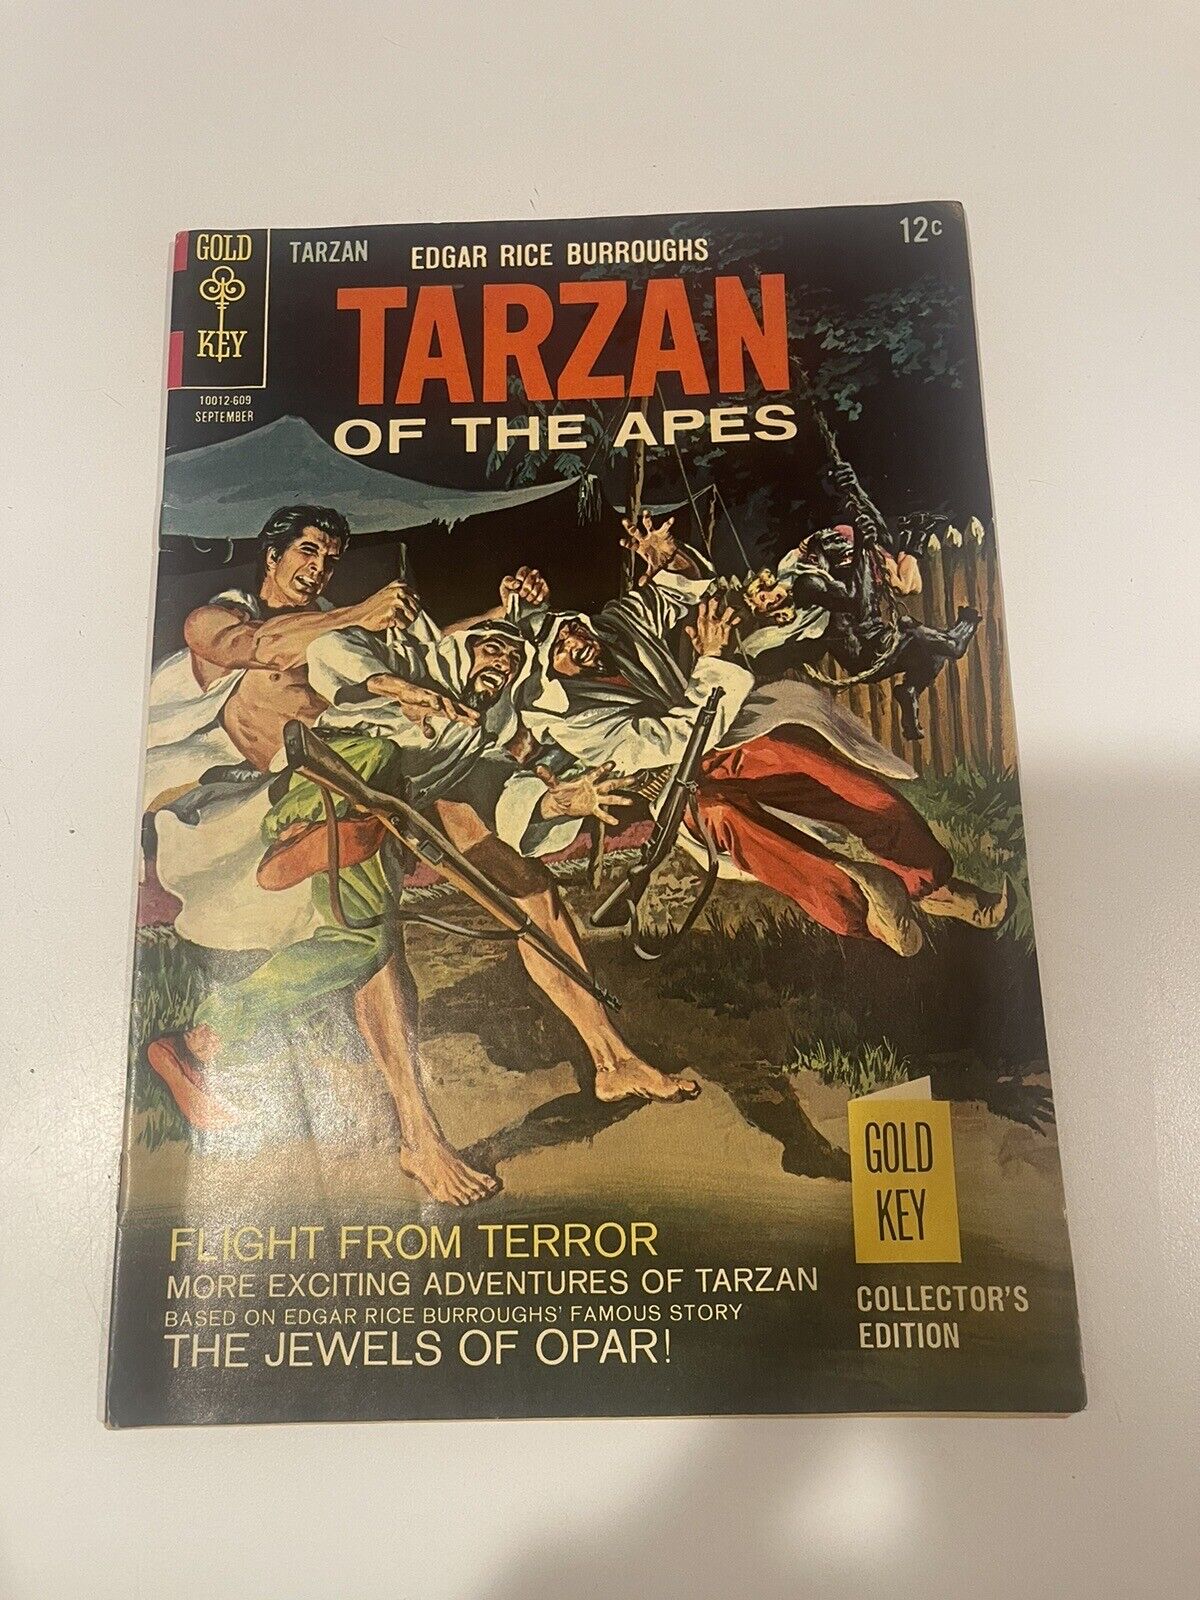 TARZAN #160 Gold Key 1966 Silver Age Comics Vintage Painted Cover Nice Copy